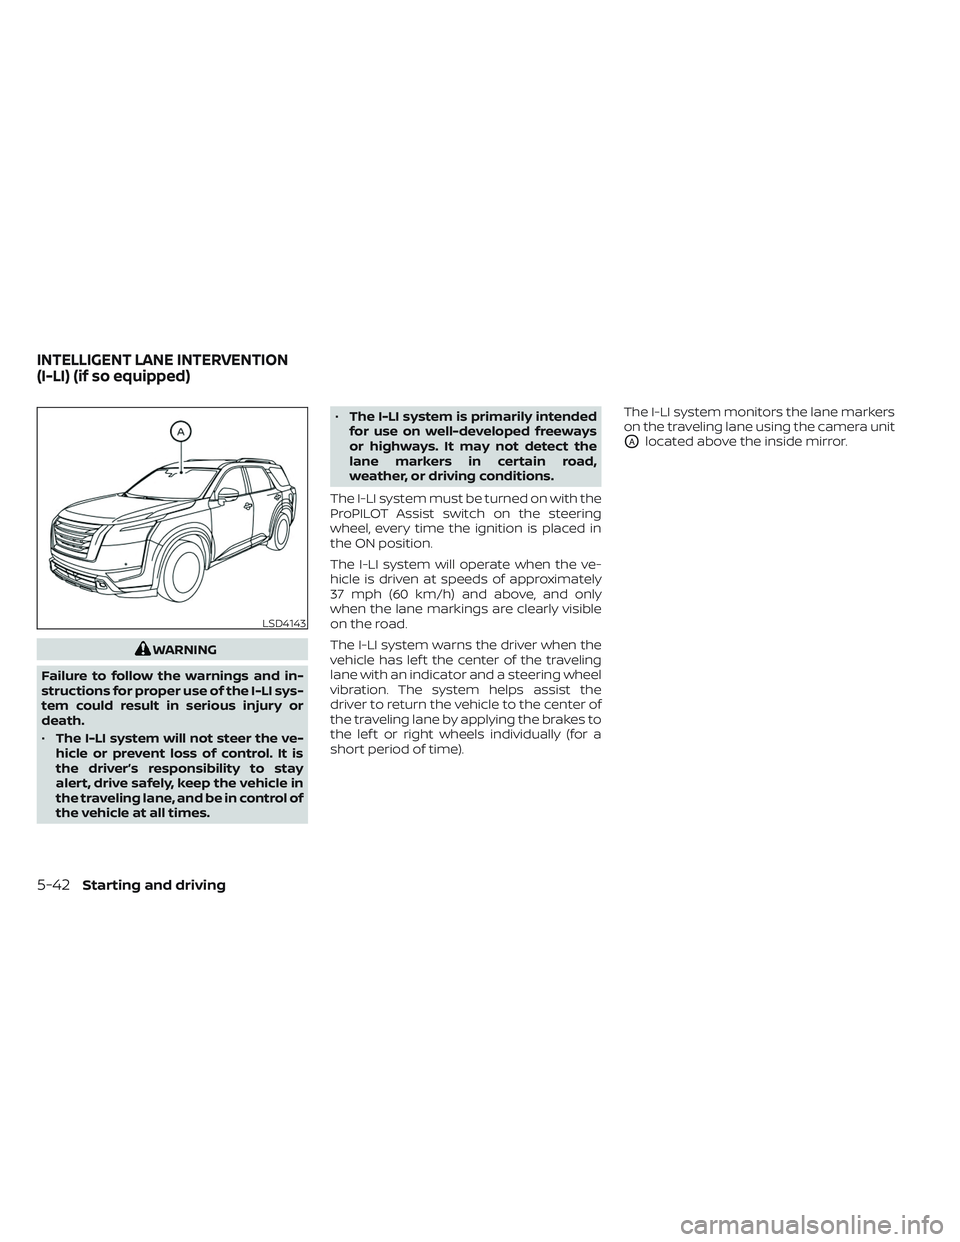 NISSAN PATHFINDER 2022  Owner´s Manual WARNING
Failure to follow the warnings and in-
structions for proper use of the I-LI sys-
tem could result in serious injury or
death.
• The I-LI system will not steer the ve-
hicle or prevent loss 